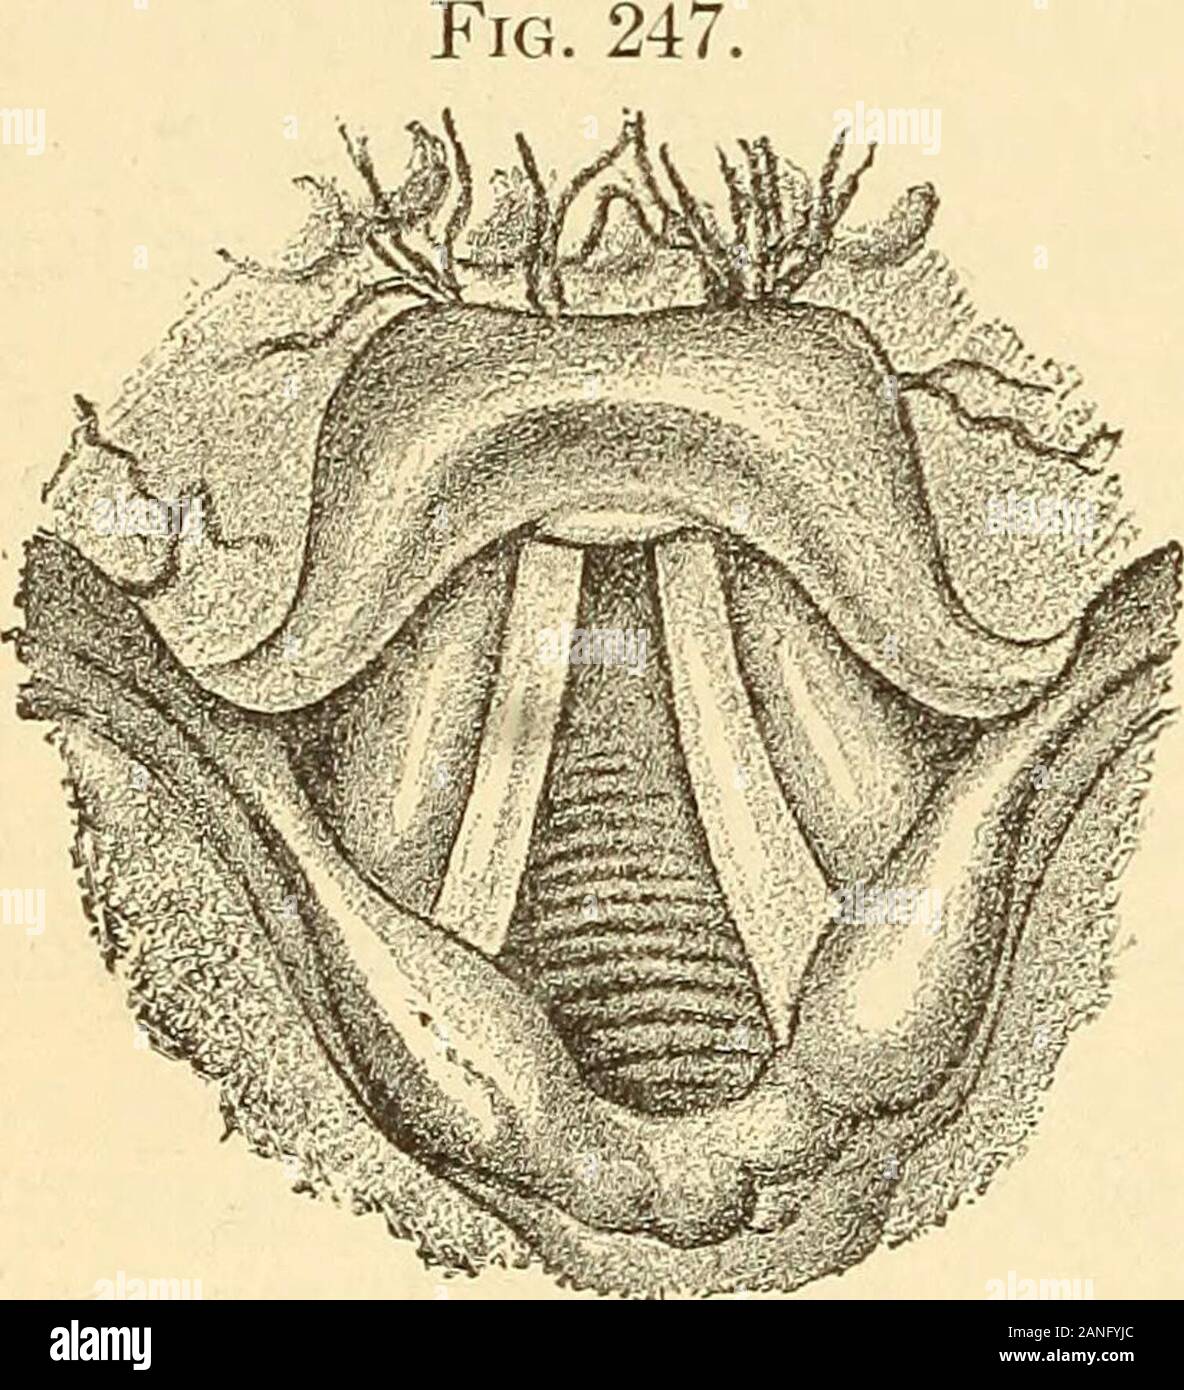 A text-book on diseases of the ear, nose and throat . ARYNX. These may be of the simple exudative variety, coming on alone or asa complication of many systemic states and general fevers. In addition,there are the acute conditions due to specific causes, such as syphilis andtubercle, and those attended by membranous formation, such as diph-theria, true and false. Acute Cataerhal Laryngitis.—This is an exudative inflamma-tion of the mucous lining of the larynx, the peculiarities of which in thissituation are due to anatomical conditions. Etiology.—Modern views incline to the belief that acute ca Stock Photo